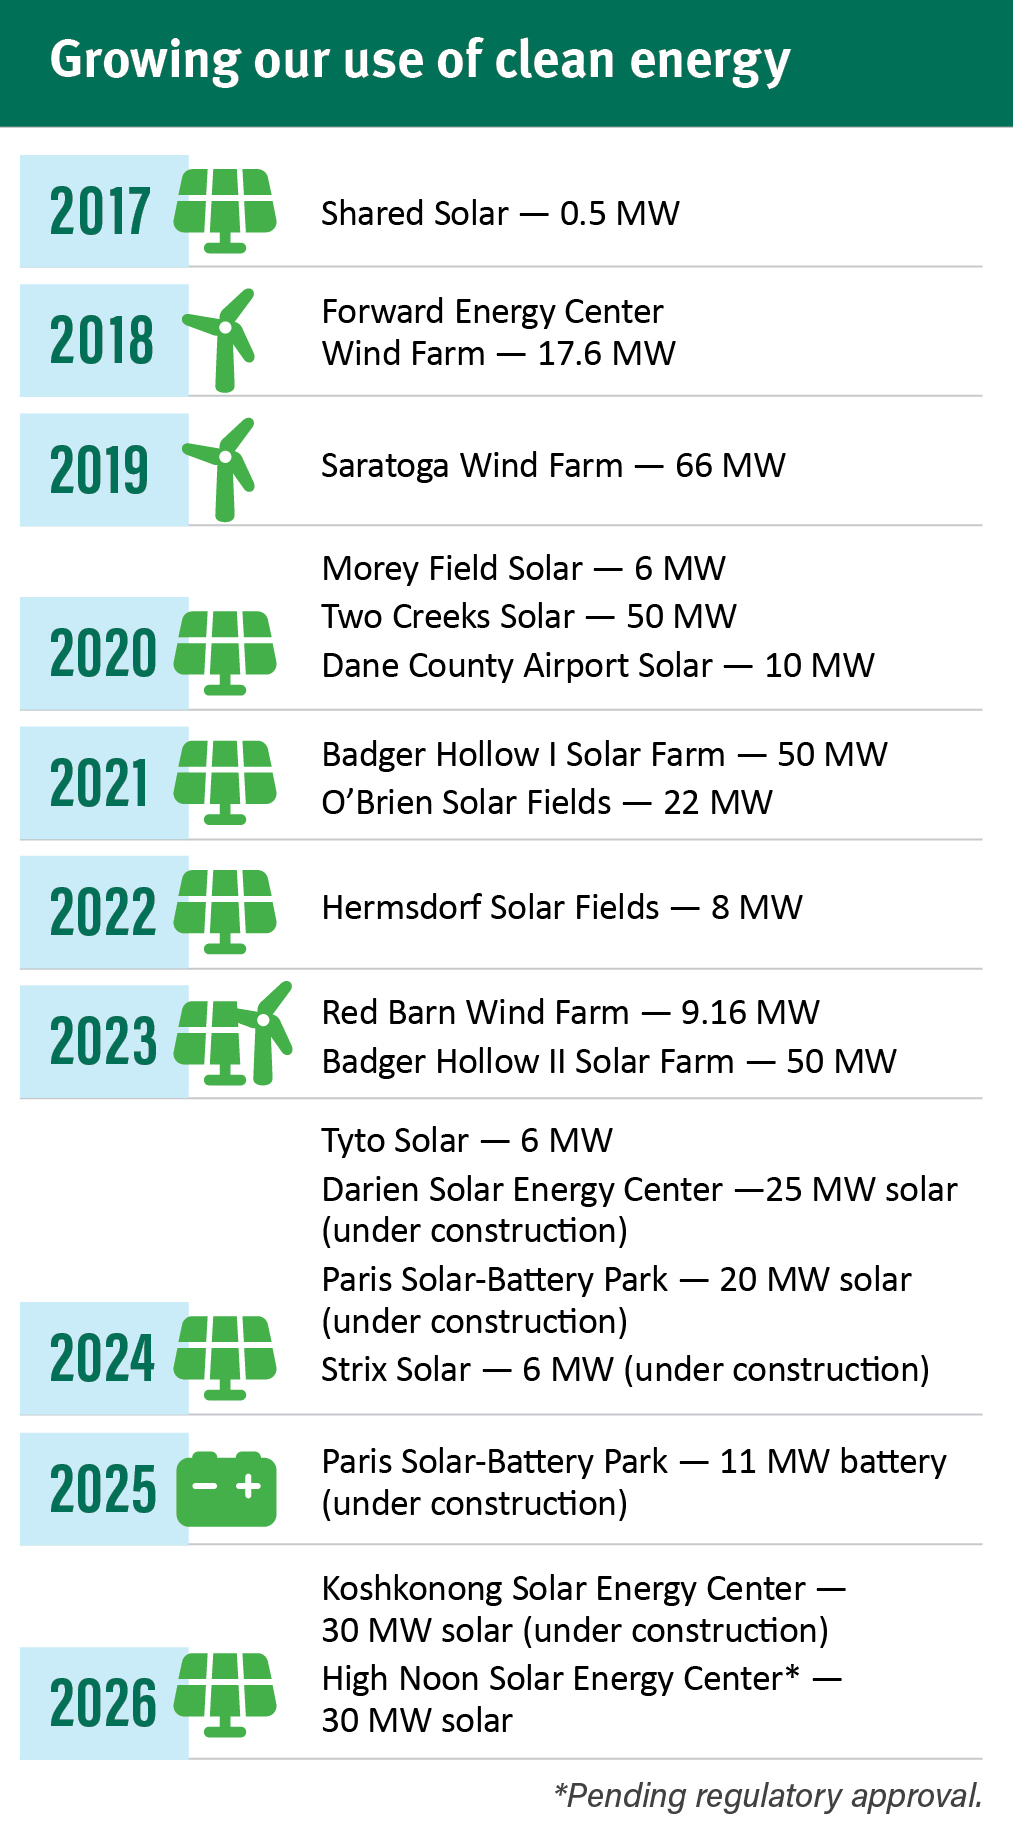 MGE recent and proposed clean energy projects